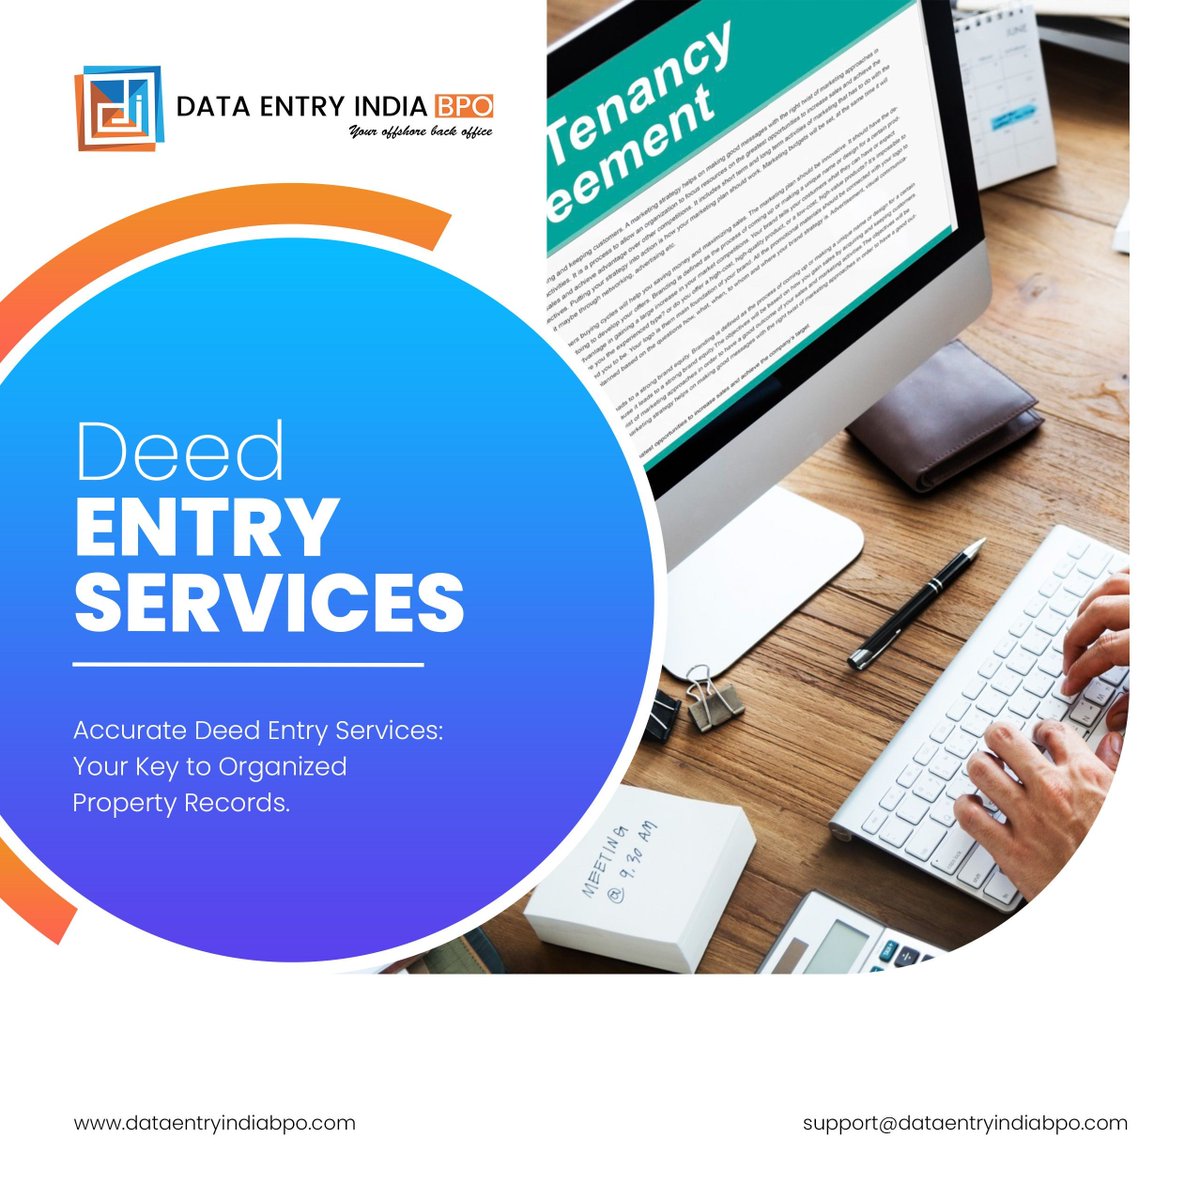 Let us handle your deed entry needs with precision and expertise. Maximize your time and productivity - choose our services!

Read more: dataentryindiabpo.com/deedentry-mort…

Email us: support@dataentryindiabpo.com

#deedentry #property #bposolutions #BPOservices #business